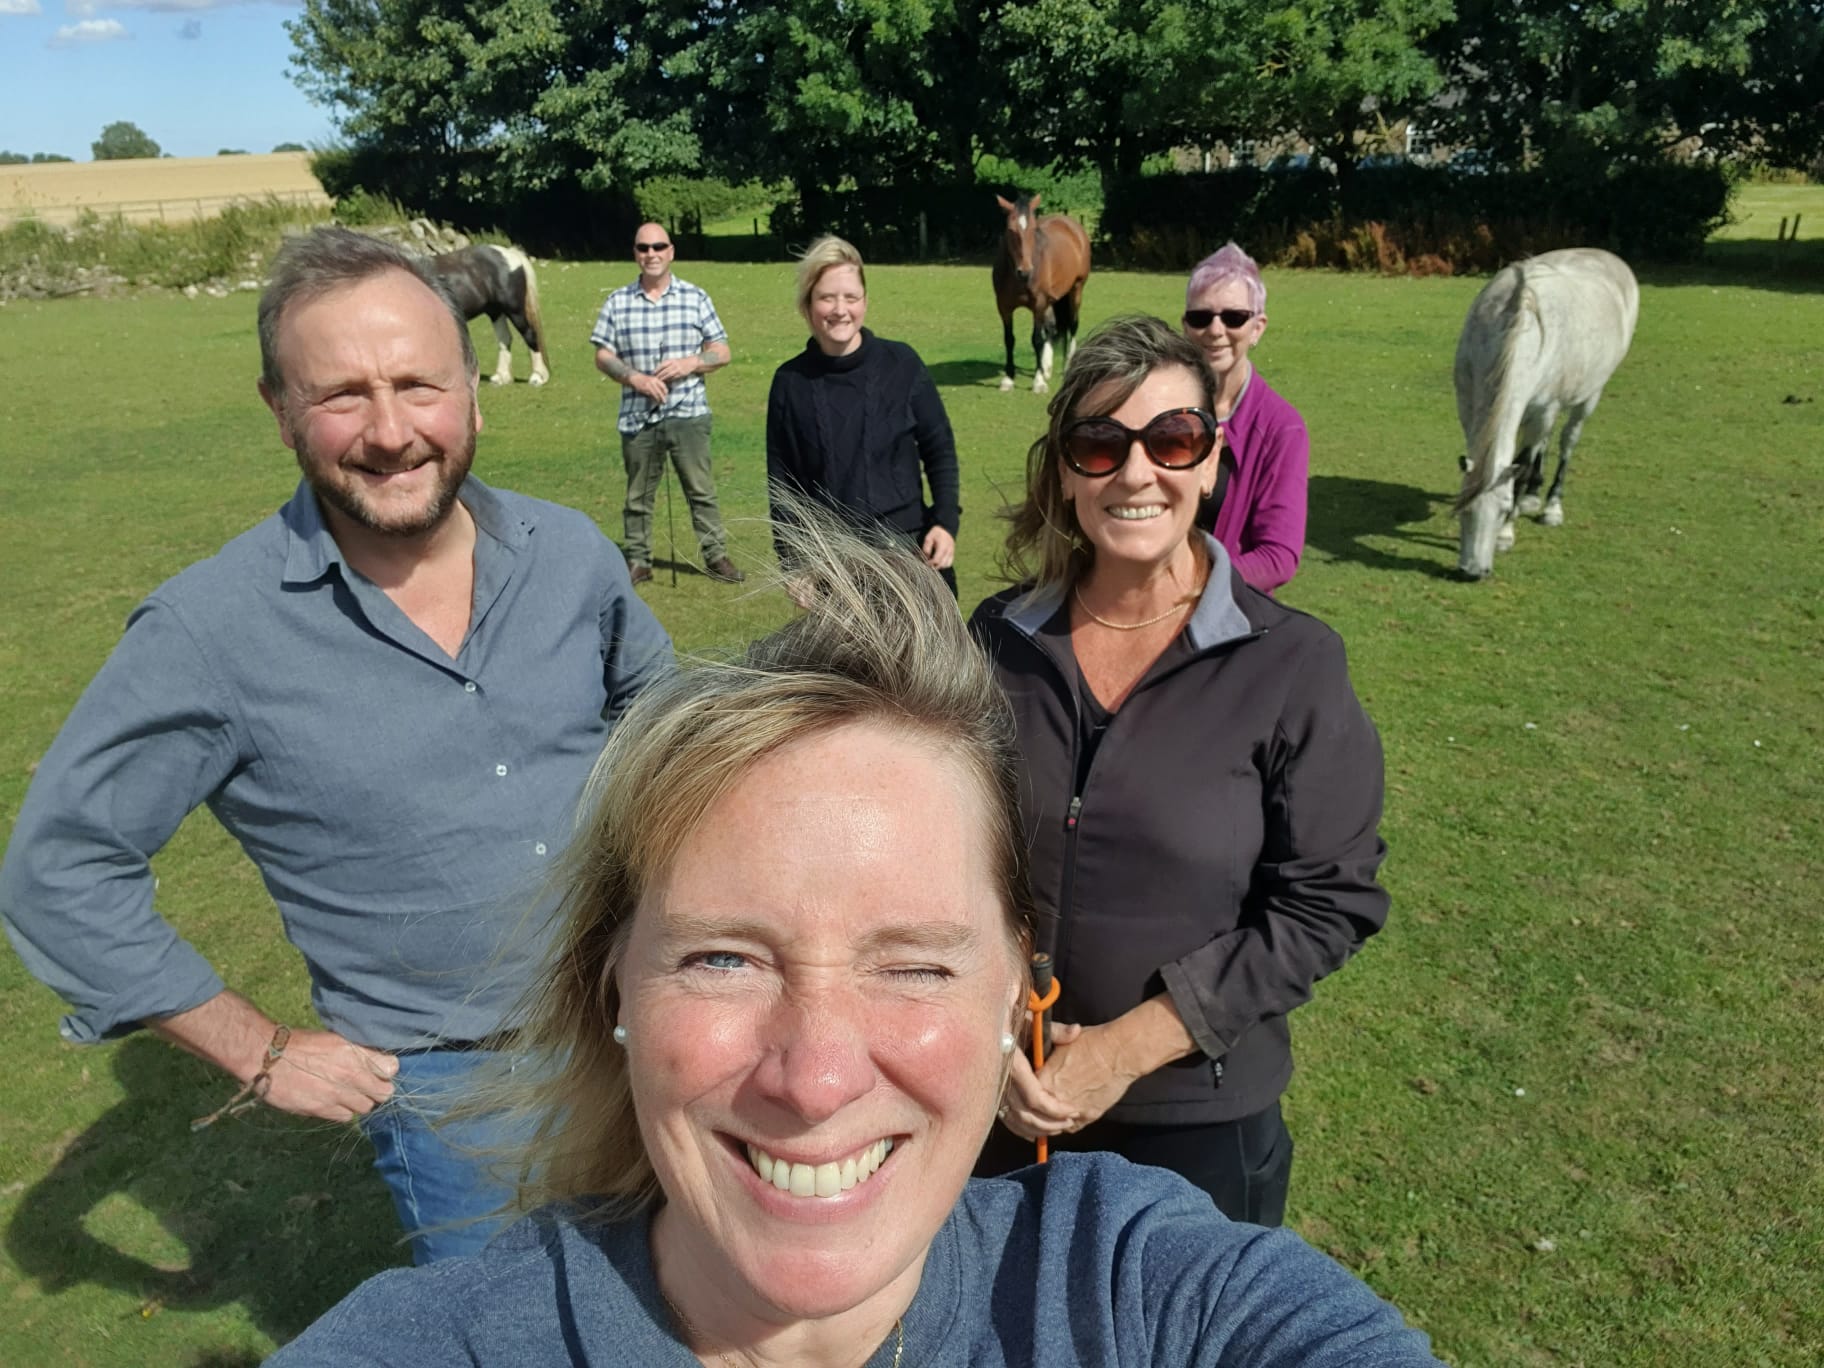 Buccleuch property launches 2023 challenge with charity partner Horse Time